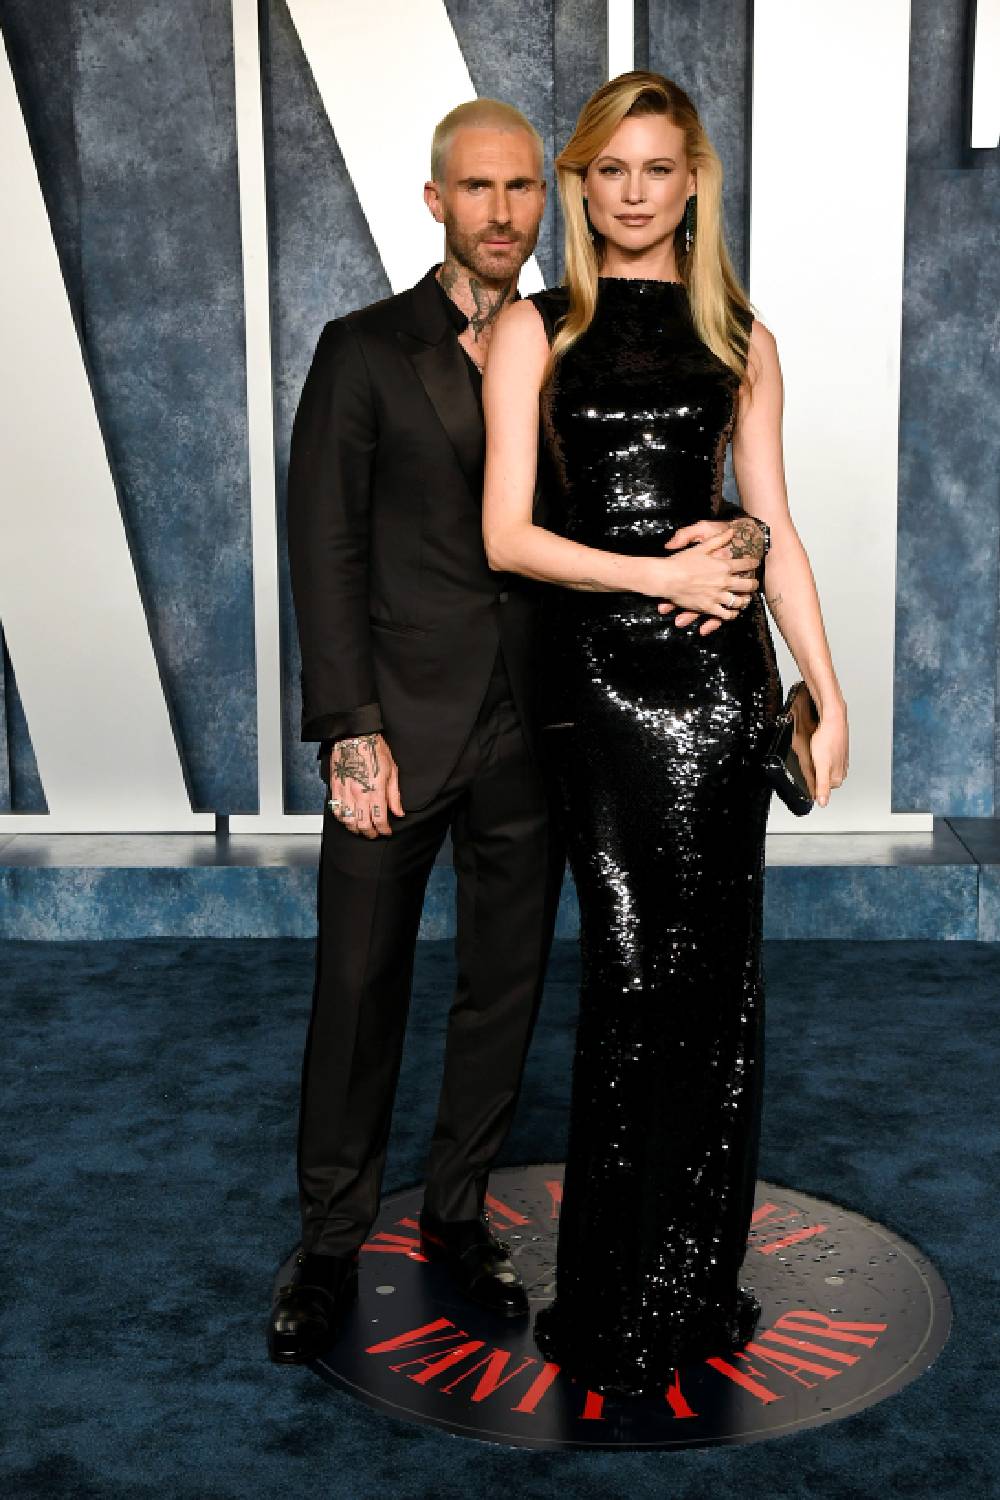 Adam Levine and Behati Prinsloo attend the Vanity Fair Oscars Party.